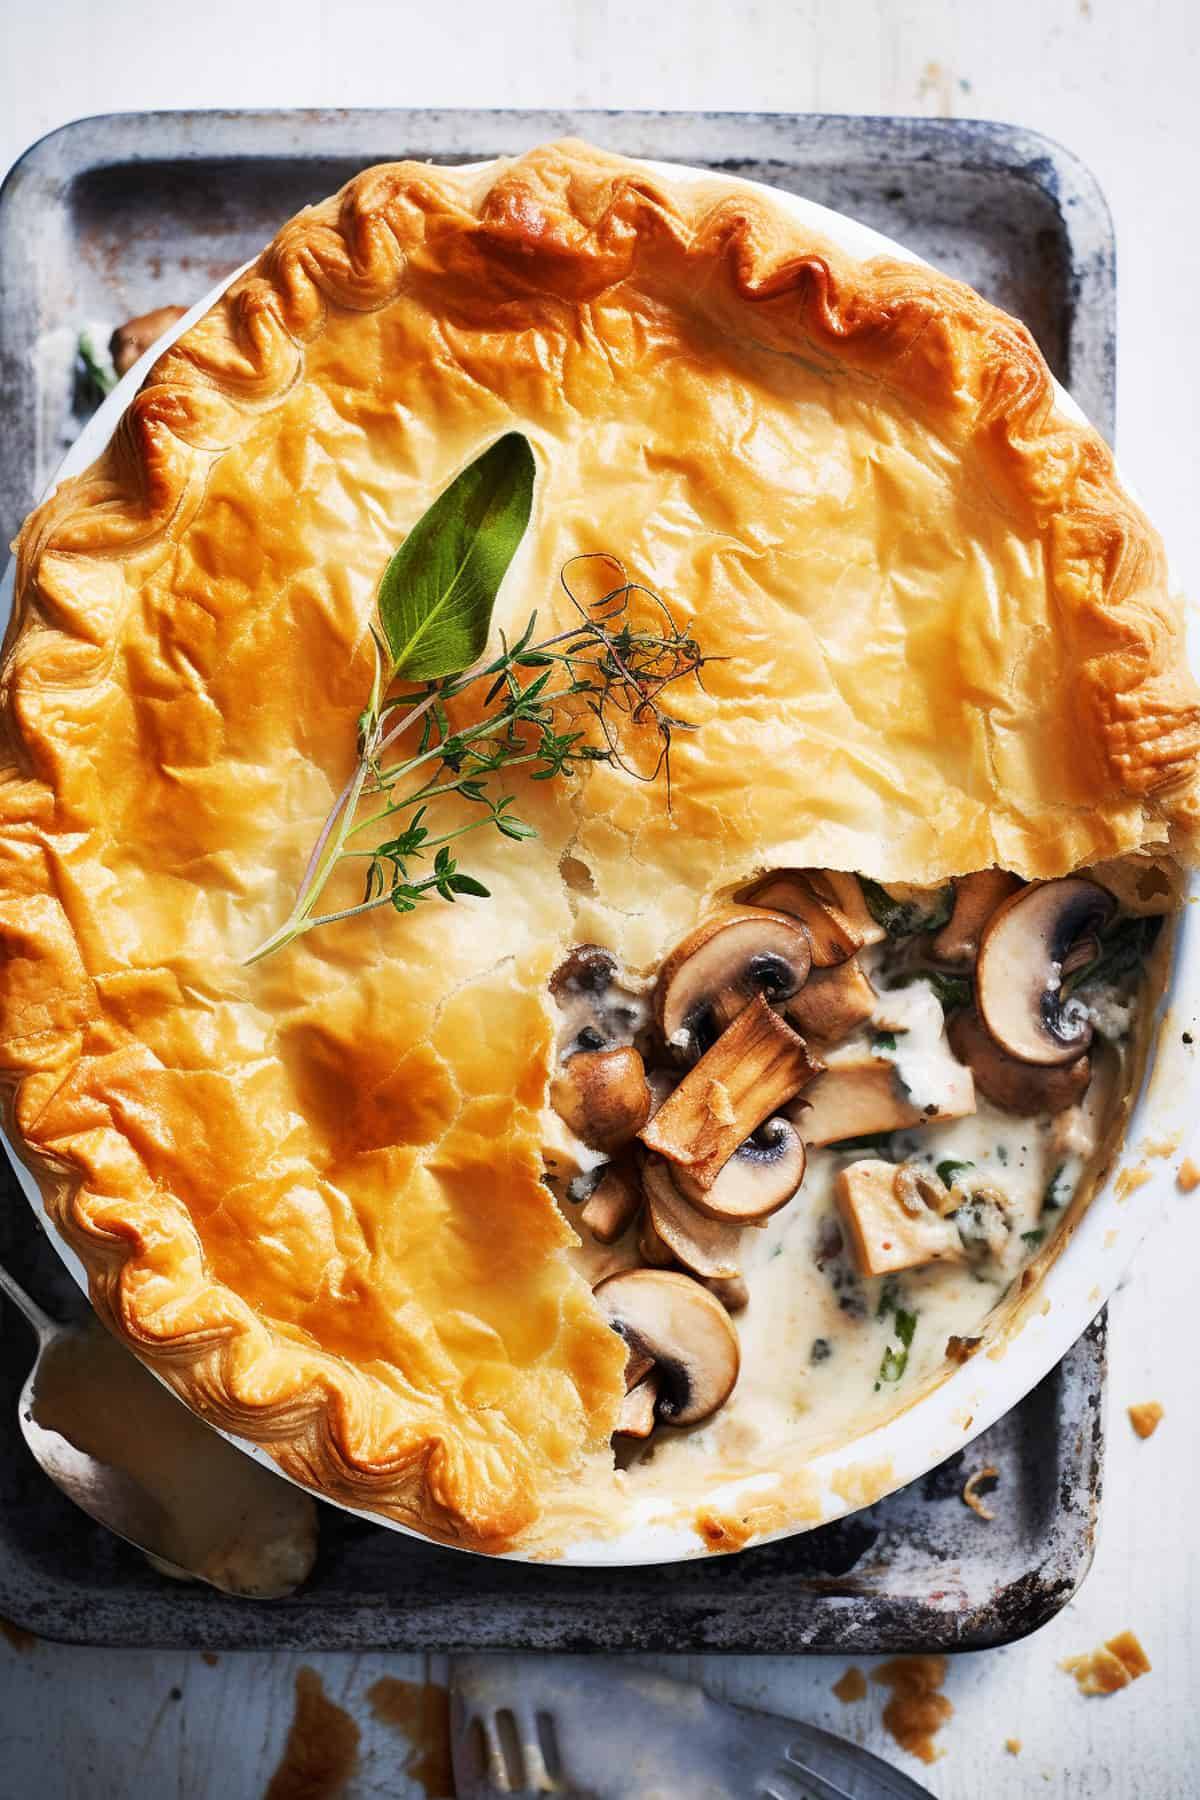 Chicken and mushroom pie with puff pastry.